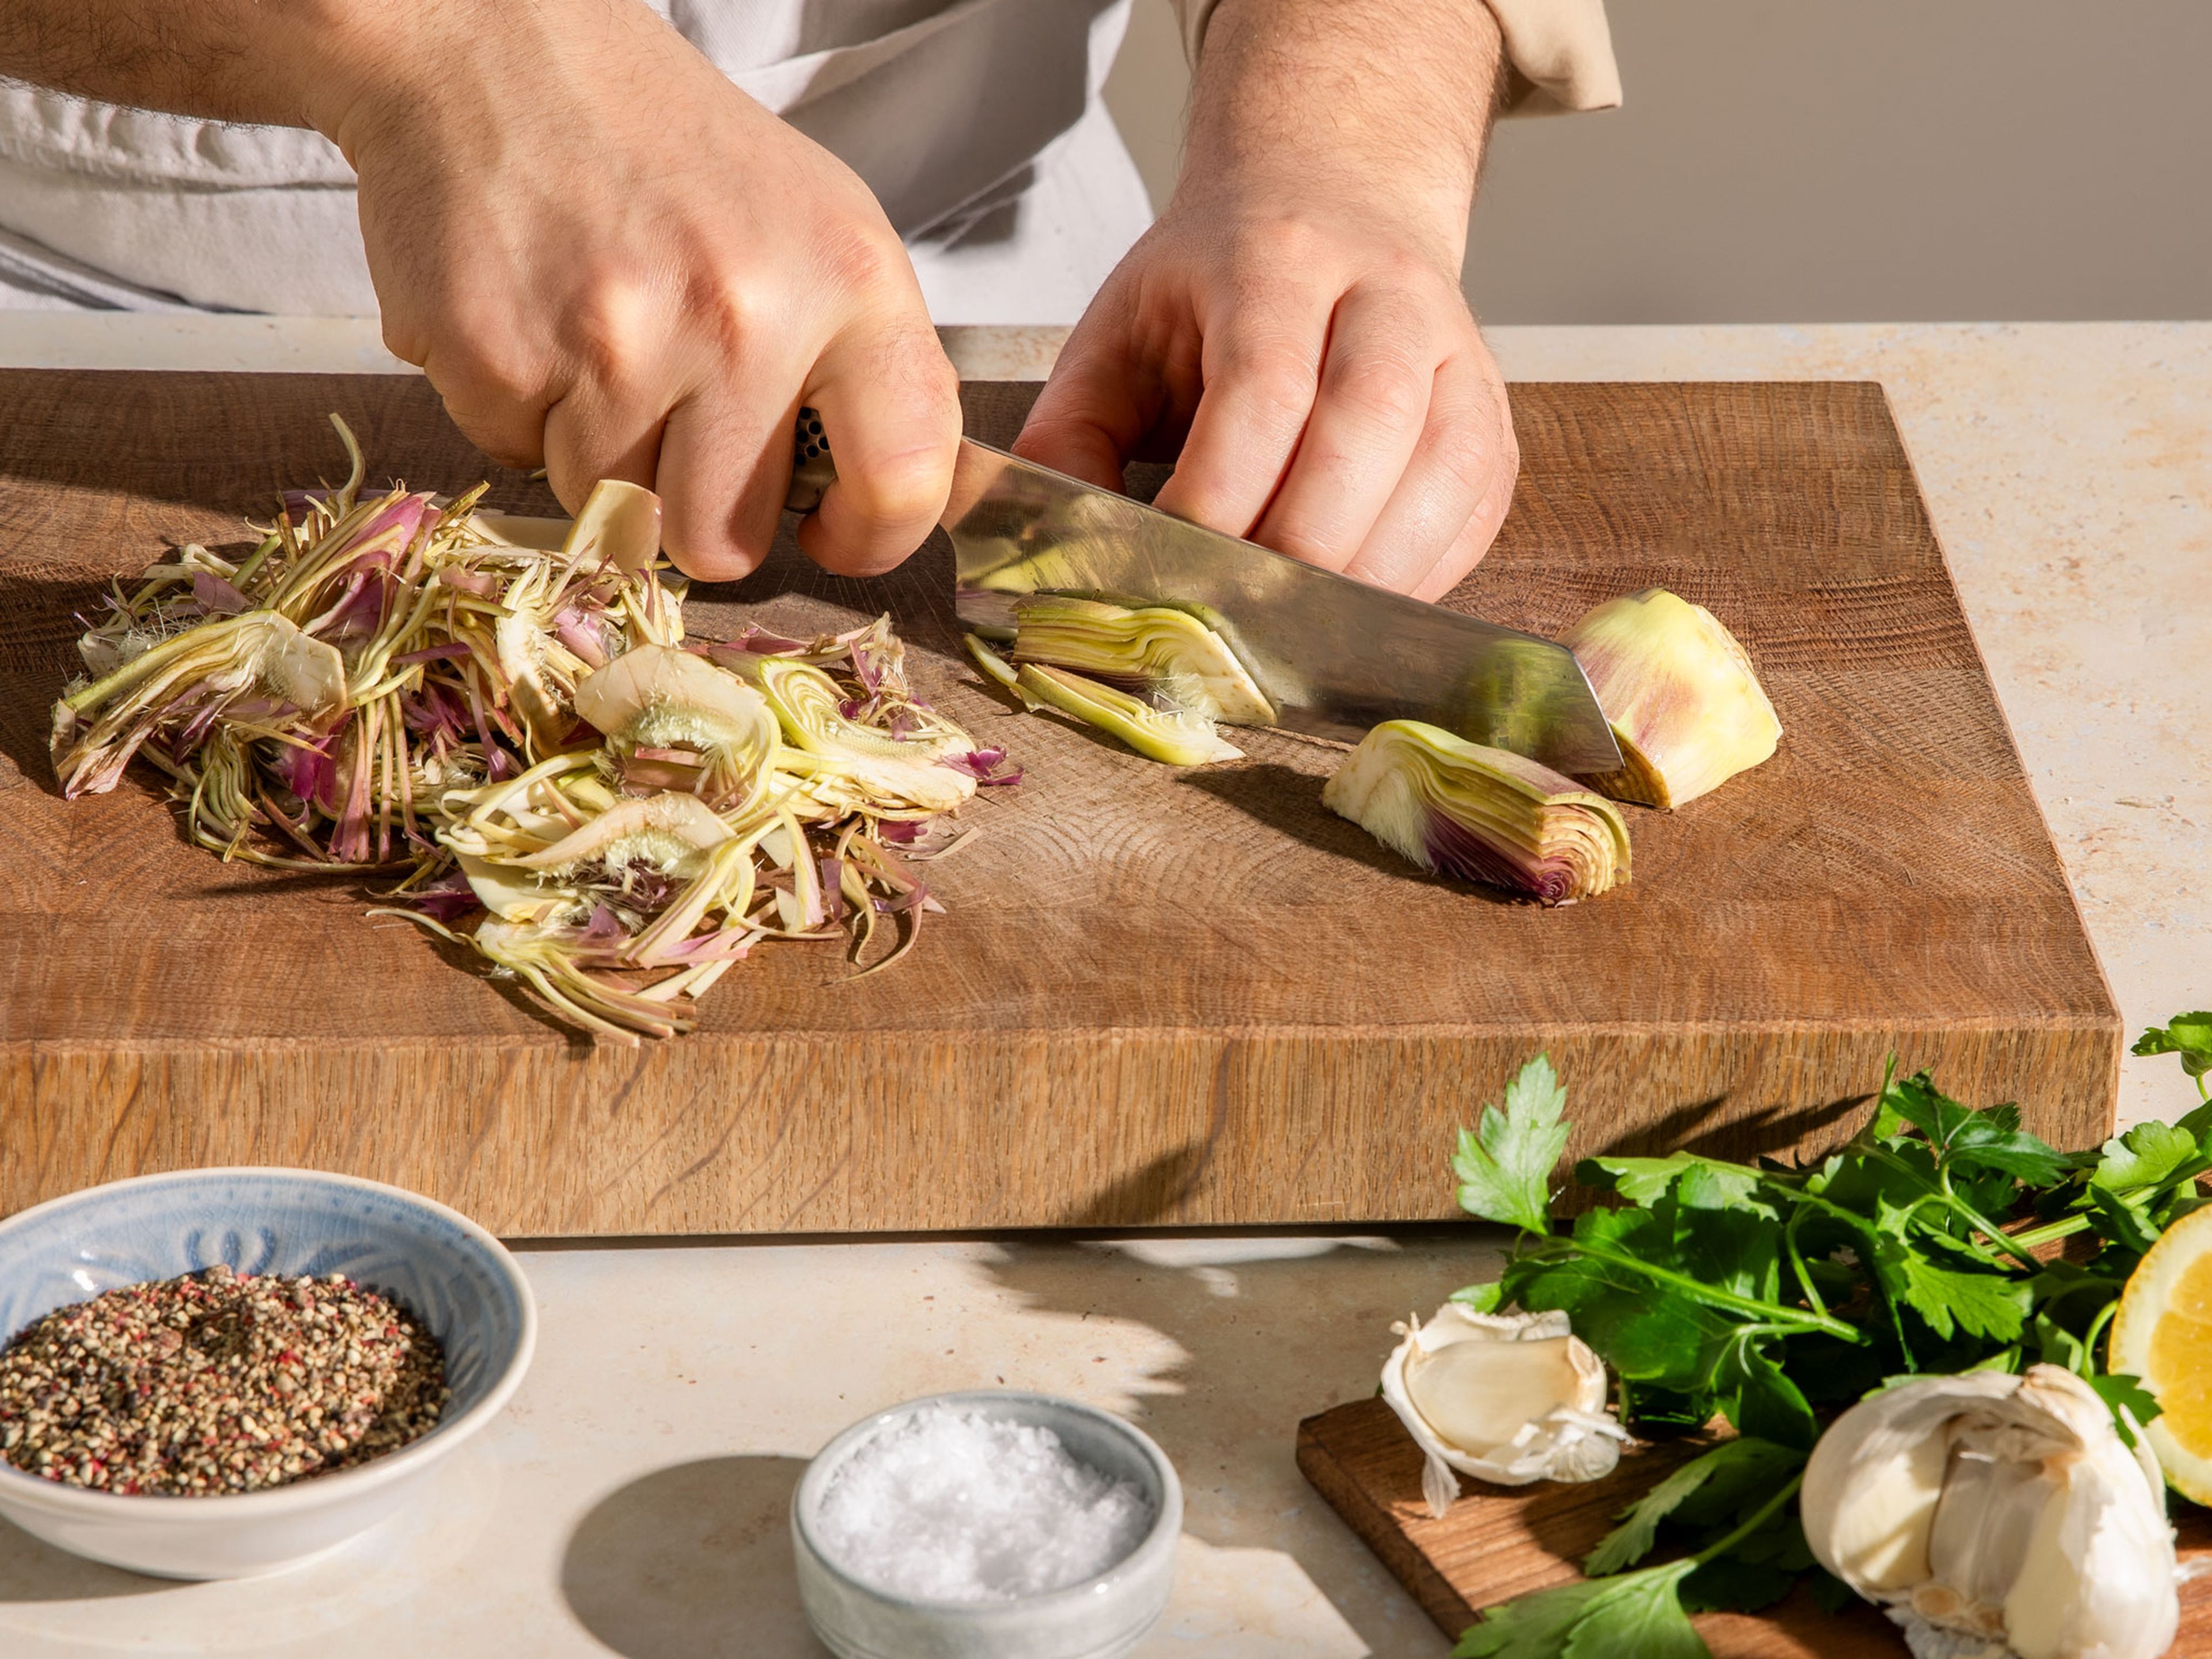 Quarter the artichokes. Then use a mandoline or a sharp knife to cut them sideways into approx. 2–3 mm thin slices so that the original shape remains visible.